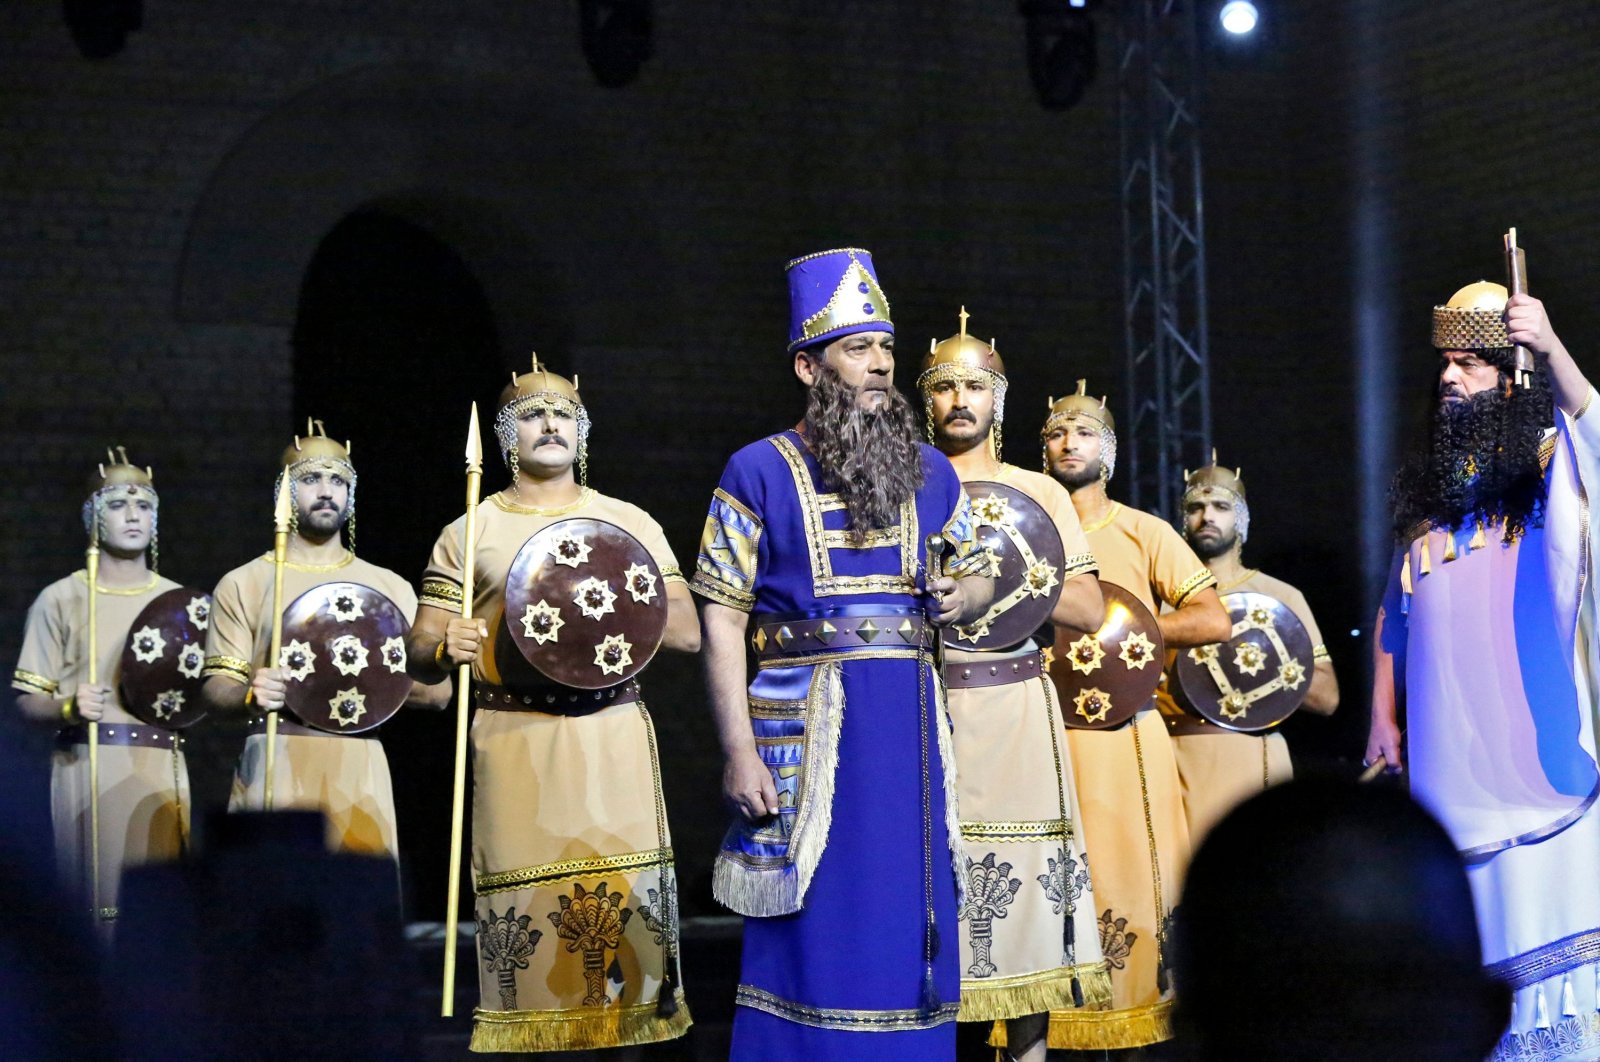 Artists perform during the opening ceremony of Babylon International Festival, at the archaeological site of ancient Babylon, about 100 kilometers (62 miles) south of the Iraqi capital Baghdad on Oct. 28, 2021. (AFP)